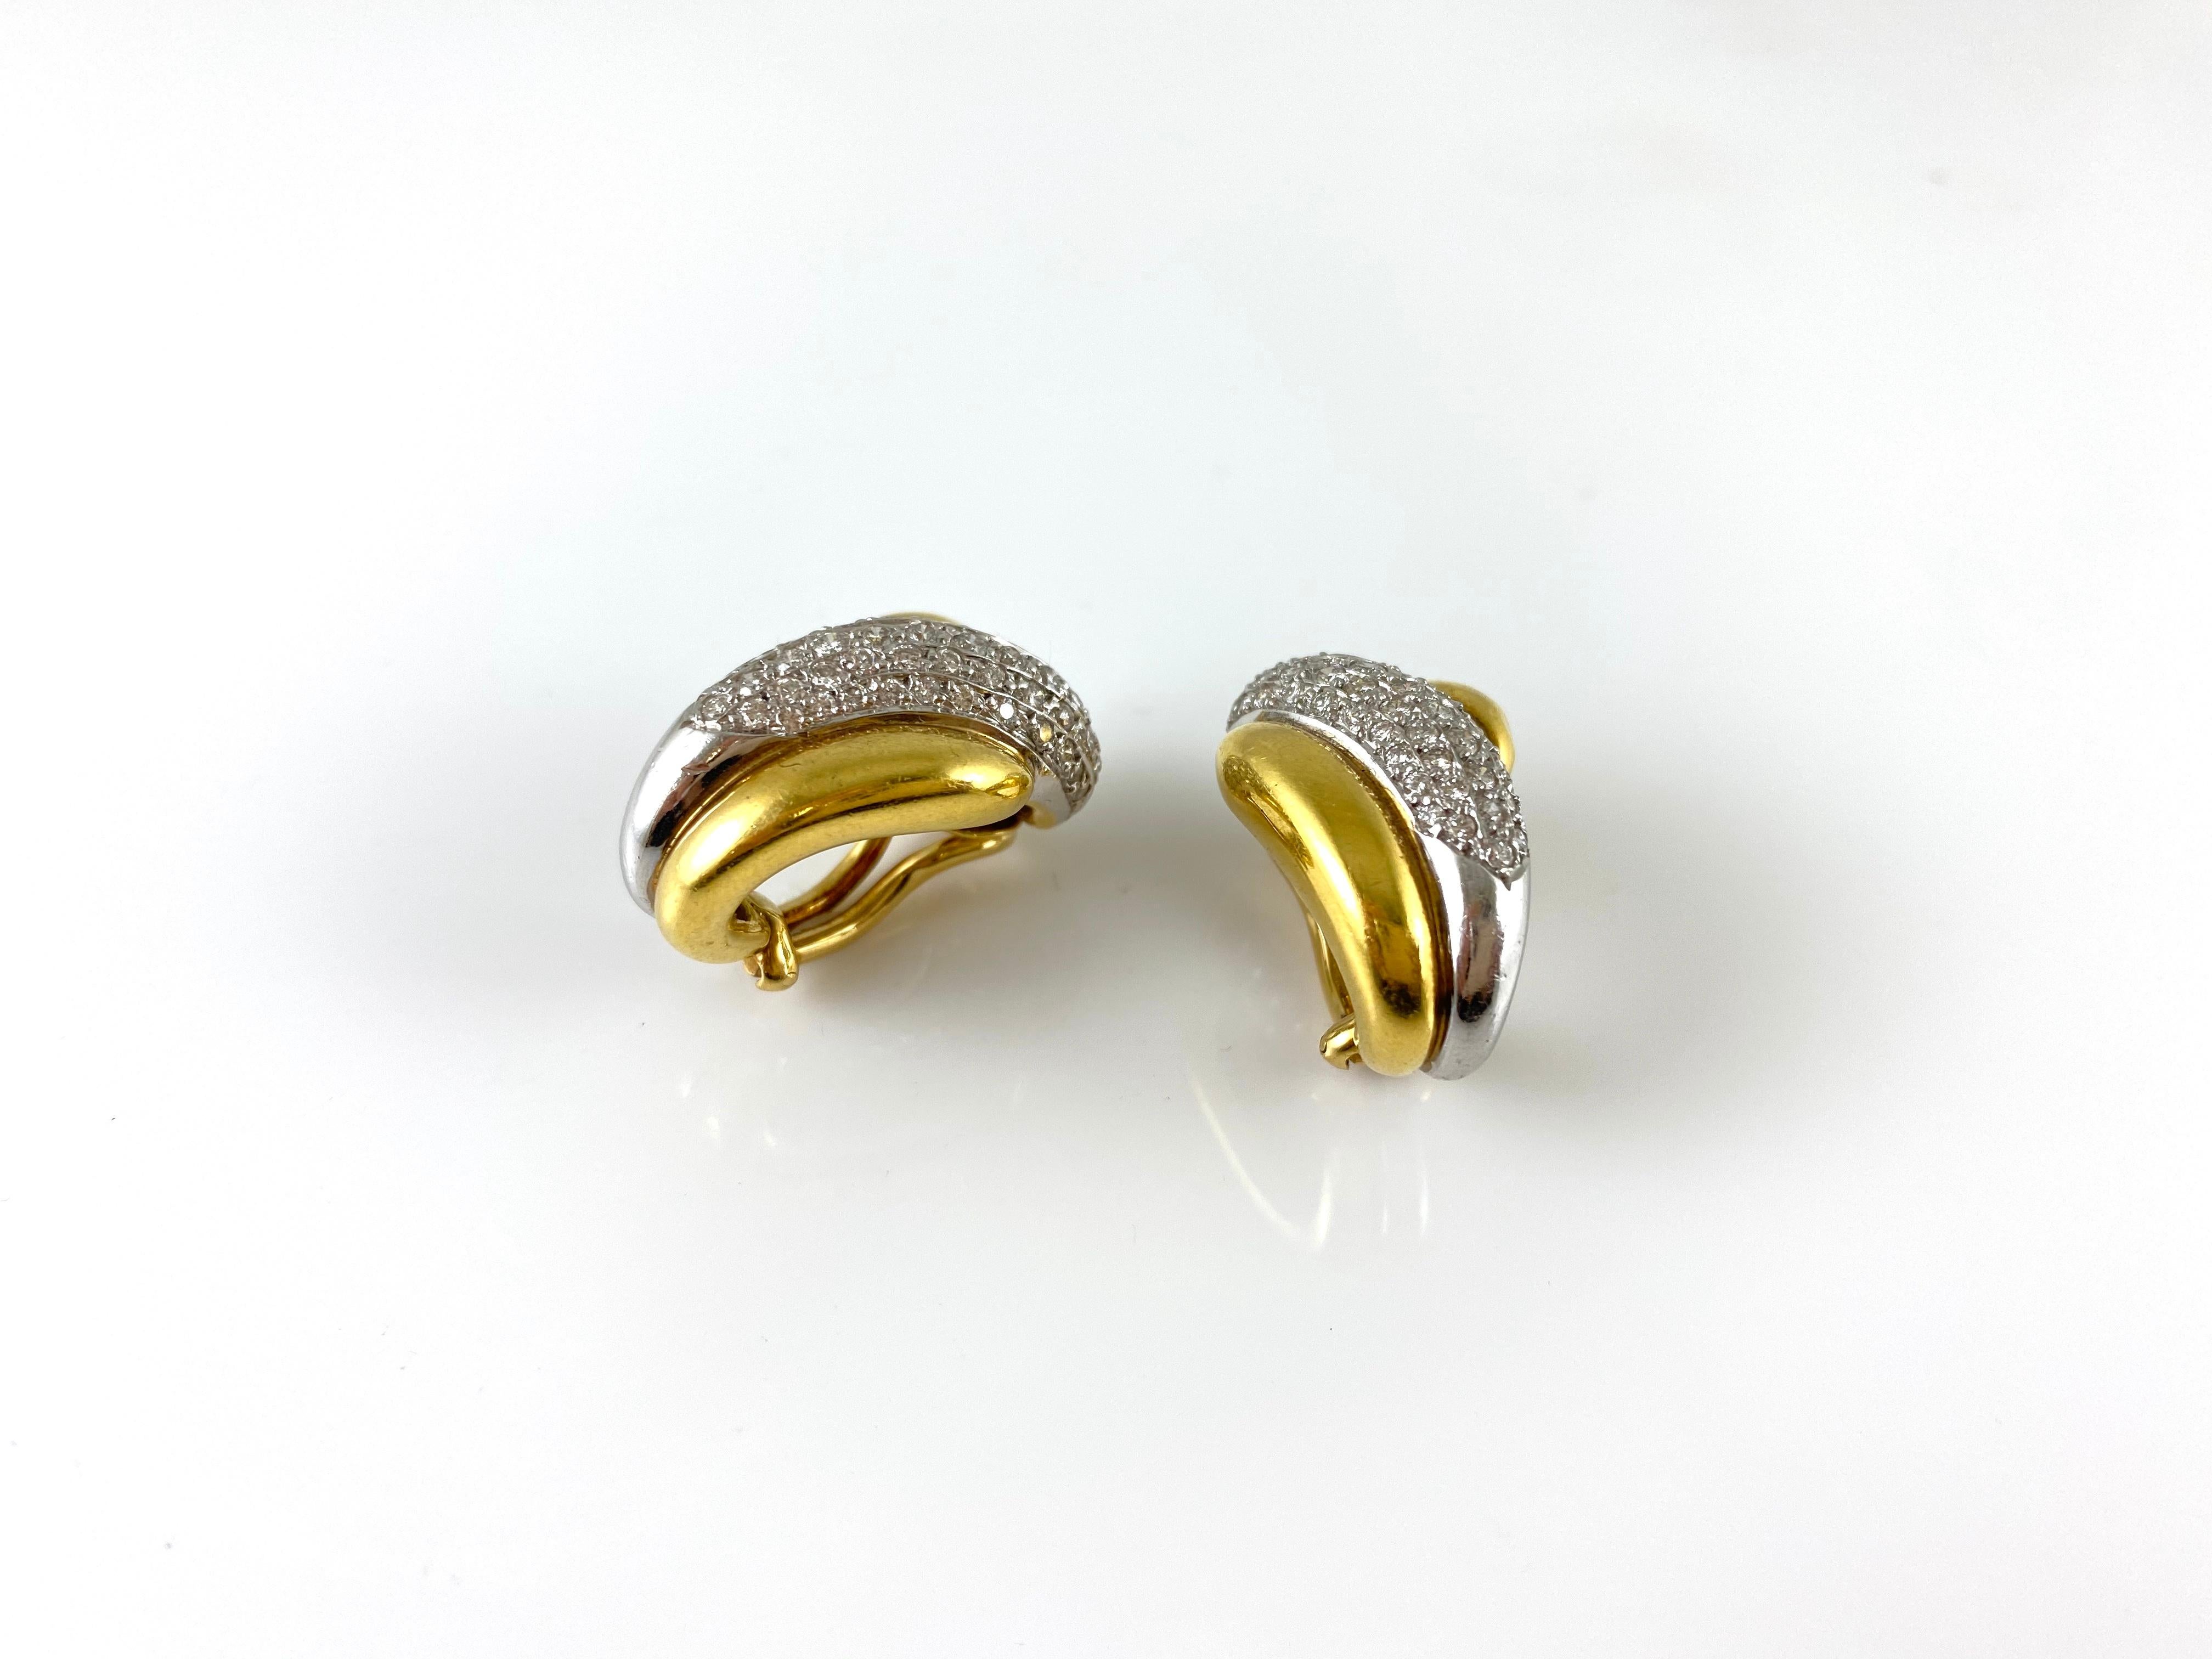 The earrings are finely crafted in 18k yellow gold with diamonds weighing approximately total of 3.50 carat.
Circa 1980.